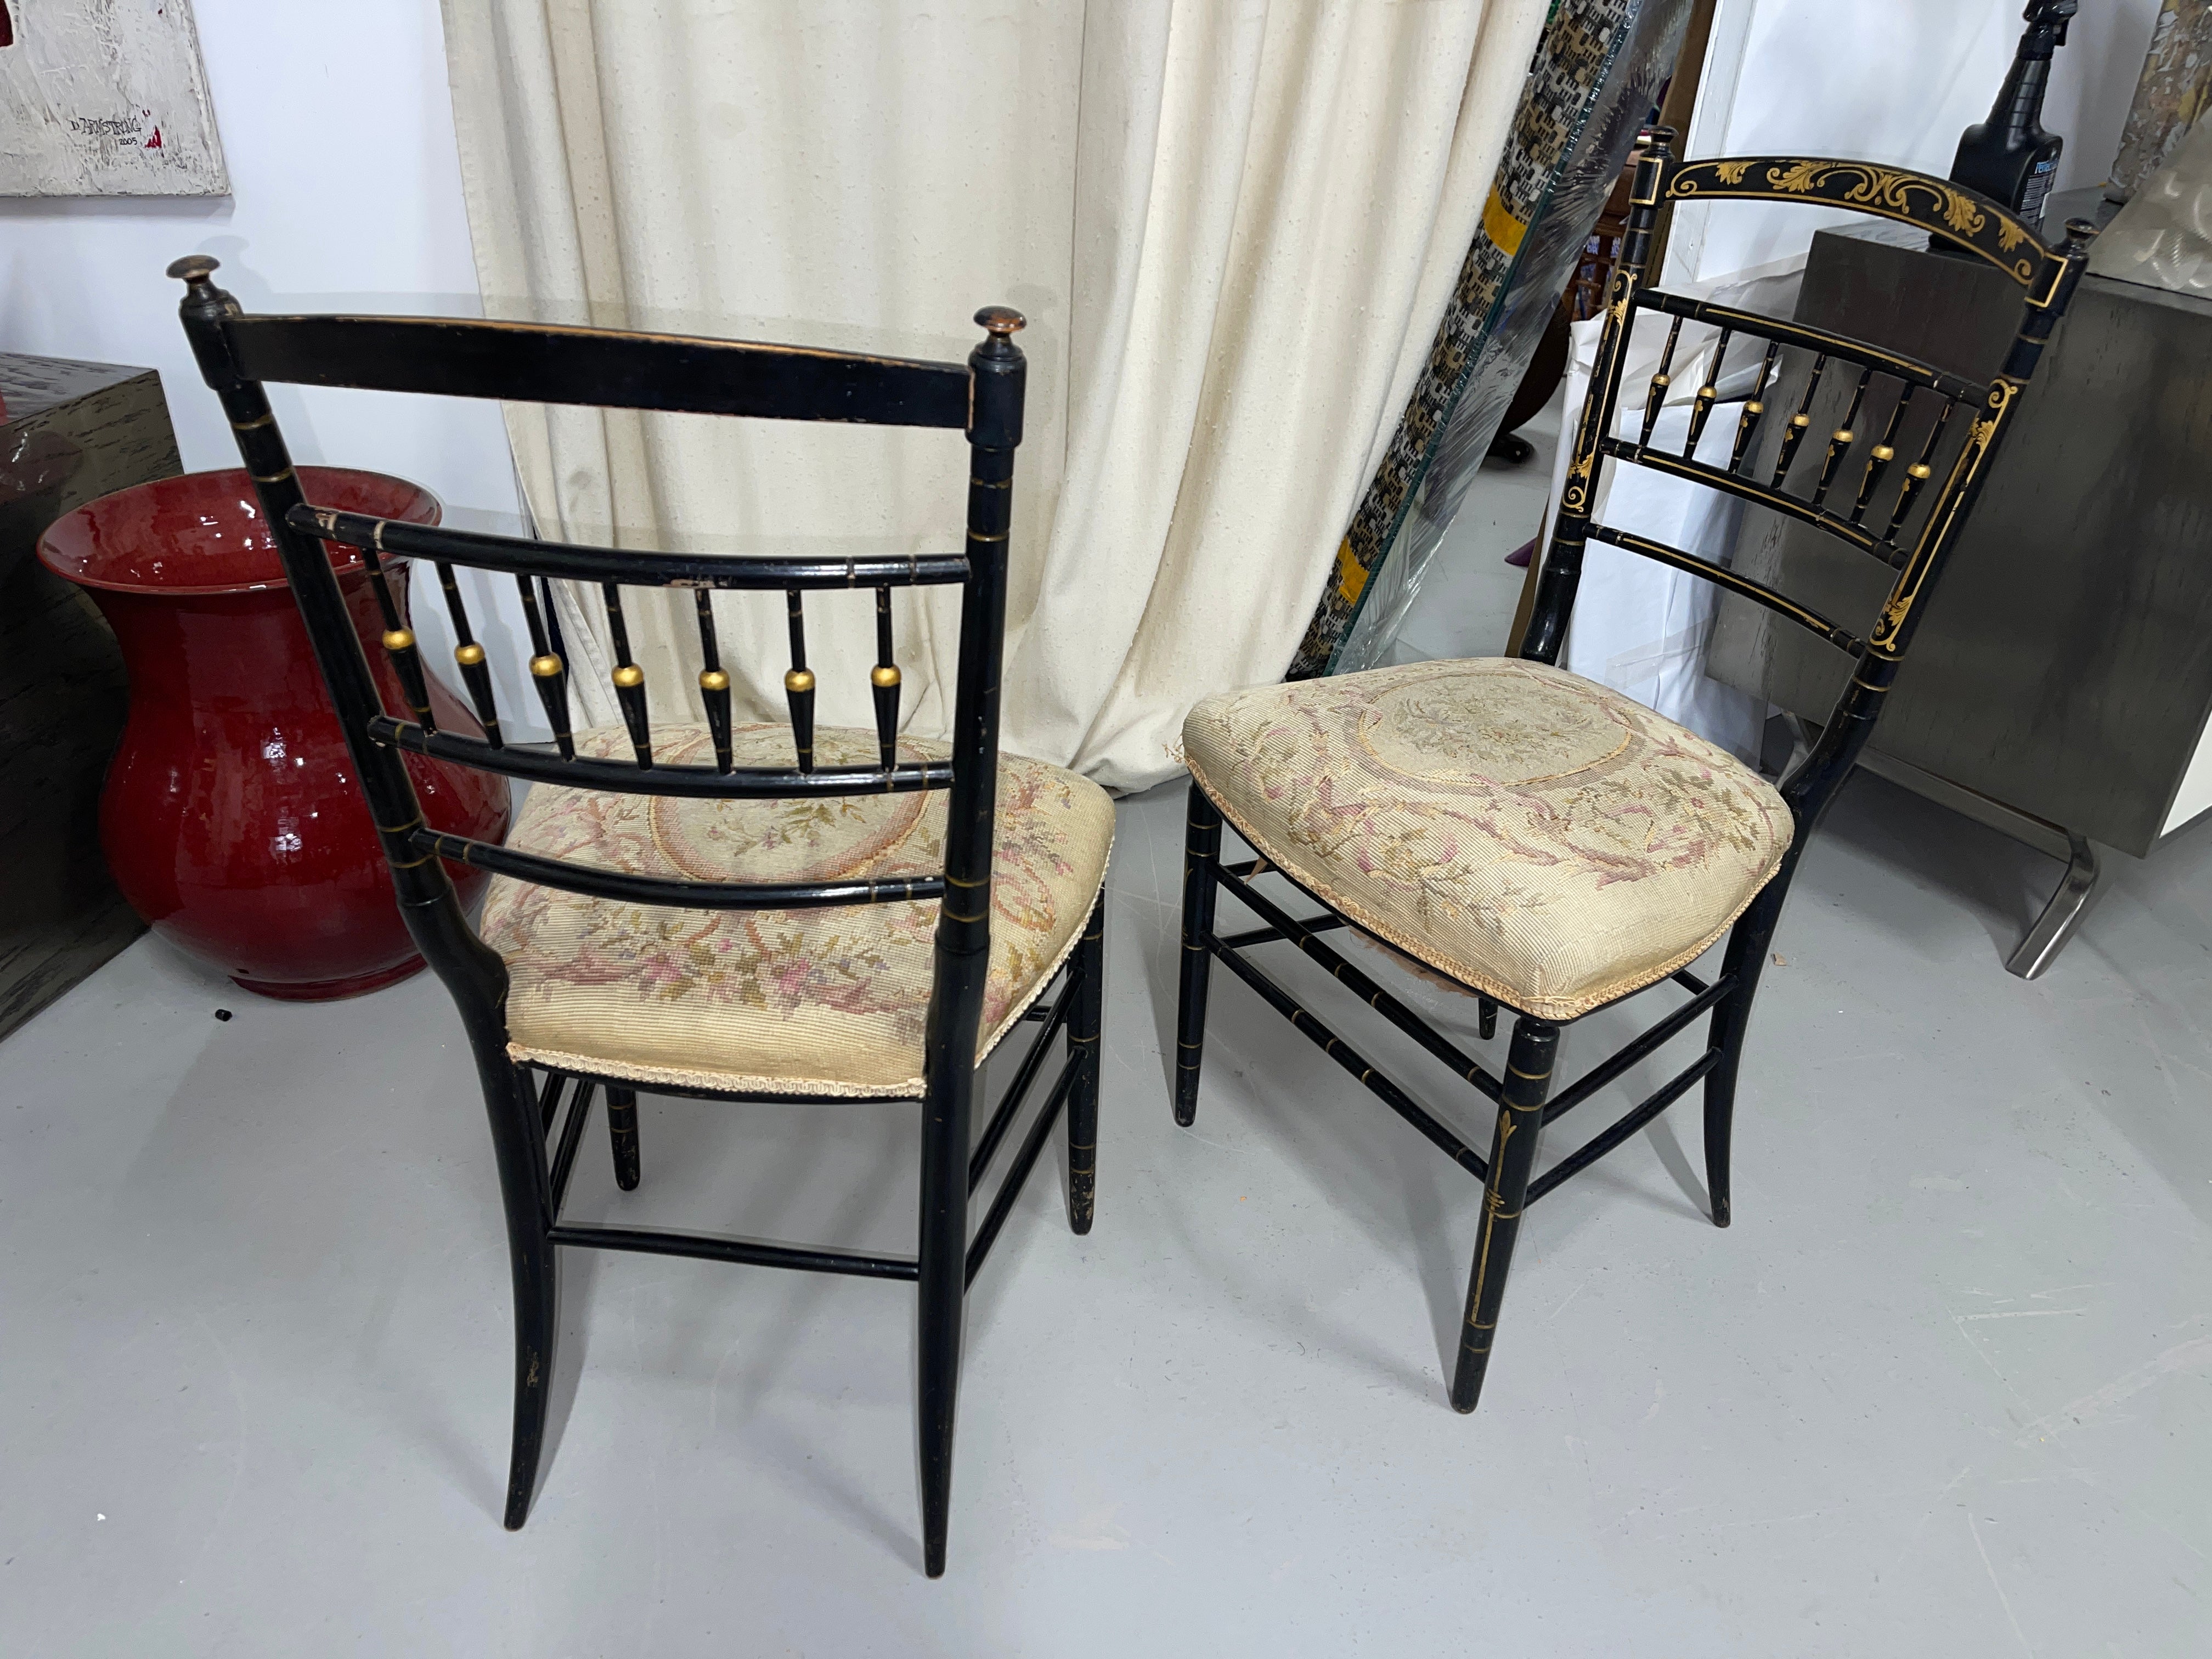 Beautiful pair of Napoleon III chairs with nice needlepoint seats. Chairs have some paint loss and one chair has a small bit of fraying to the border left front. The duvet bottom covers is also slightly torn. Nice overall condition for chairs of